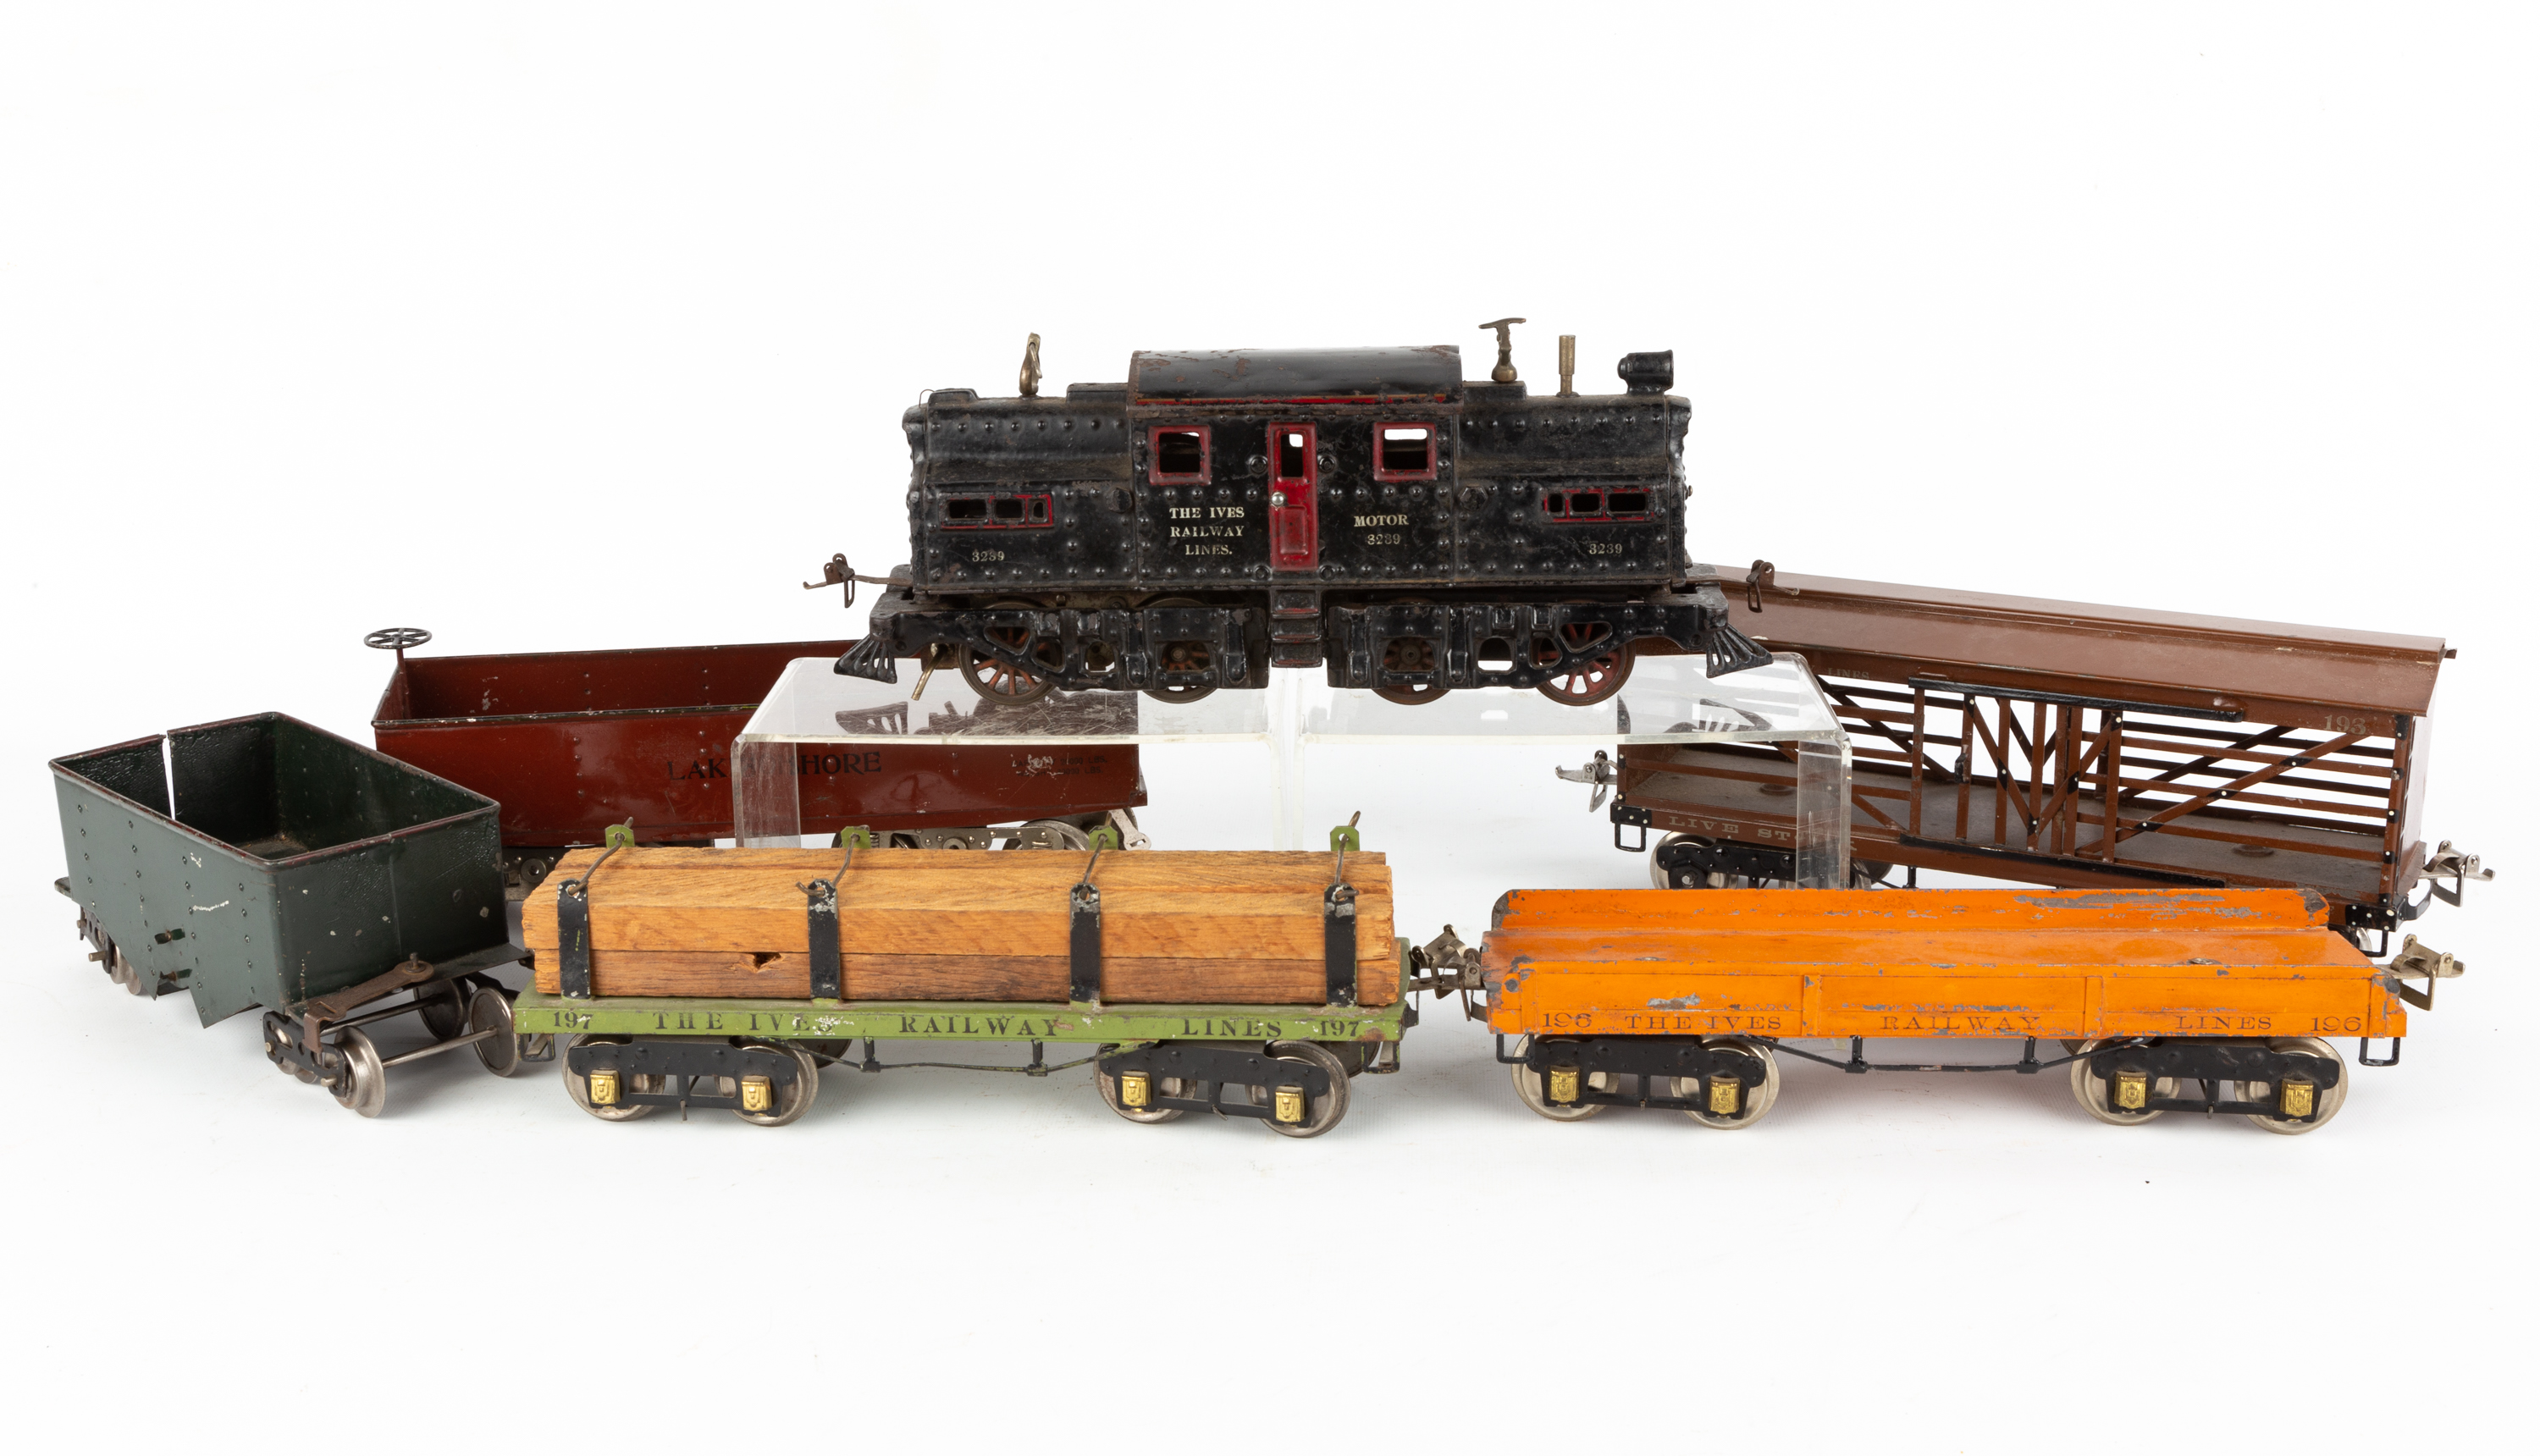 IVES 3239 TRAIN SET Early 20th century.